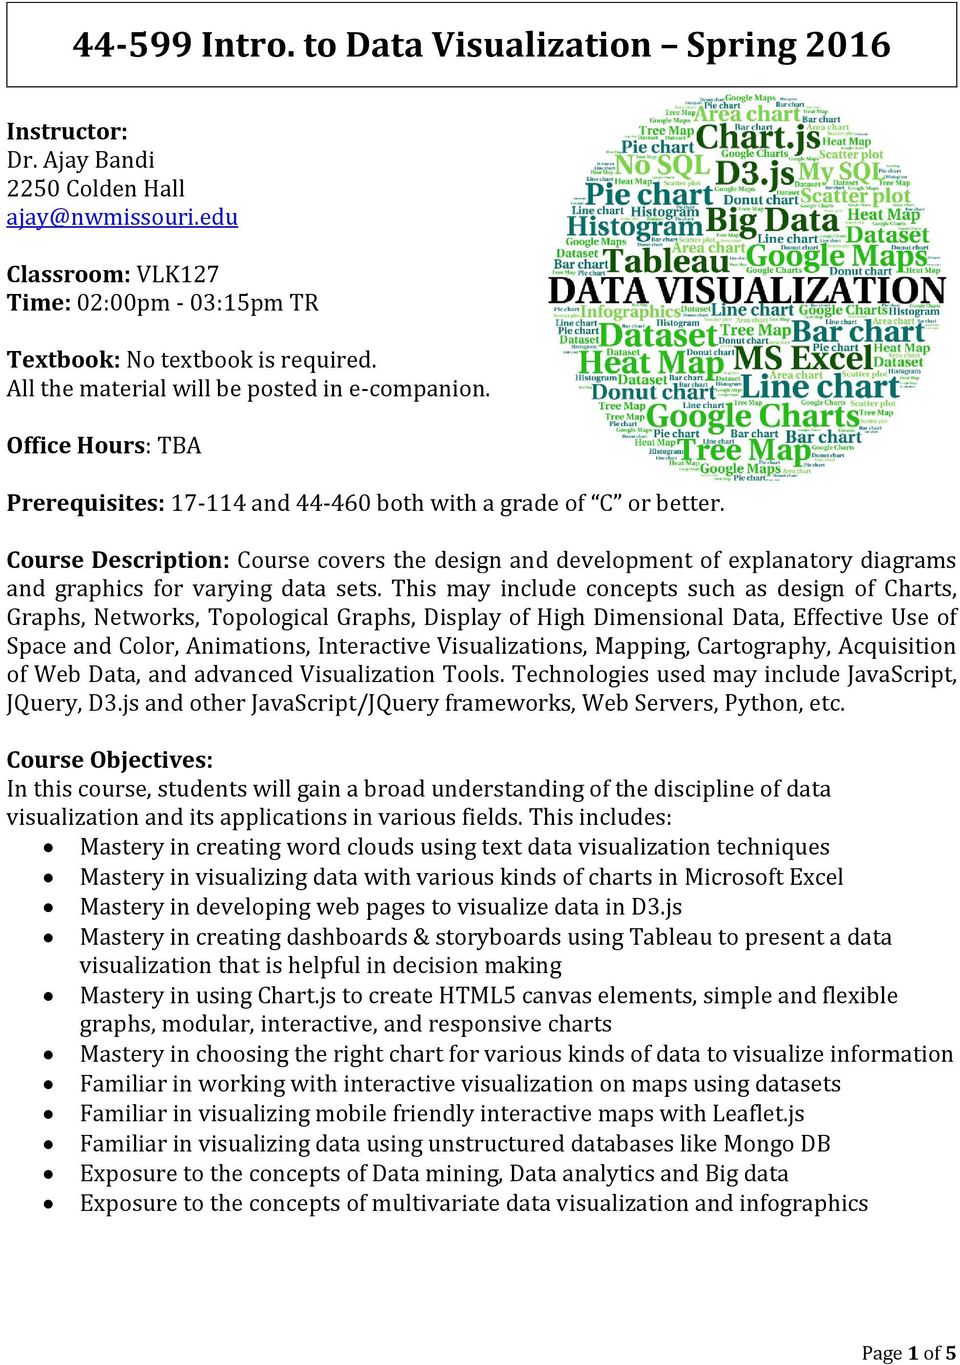 Course Description: Course covers the design and development of explanatory diagrams and graphics for varying data sets.